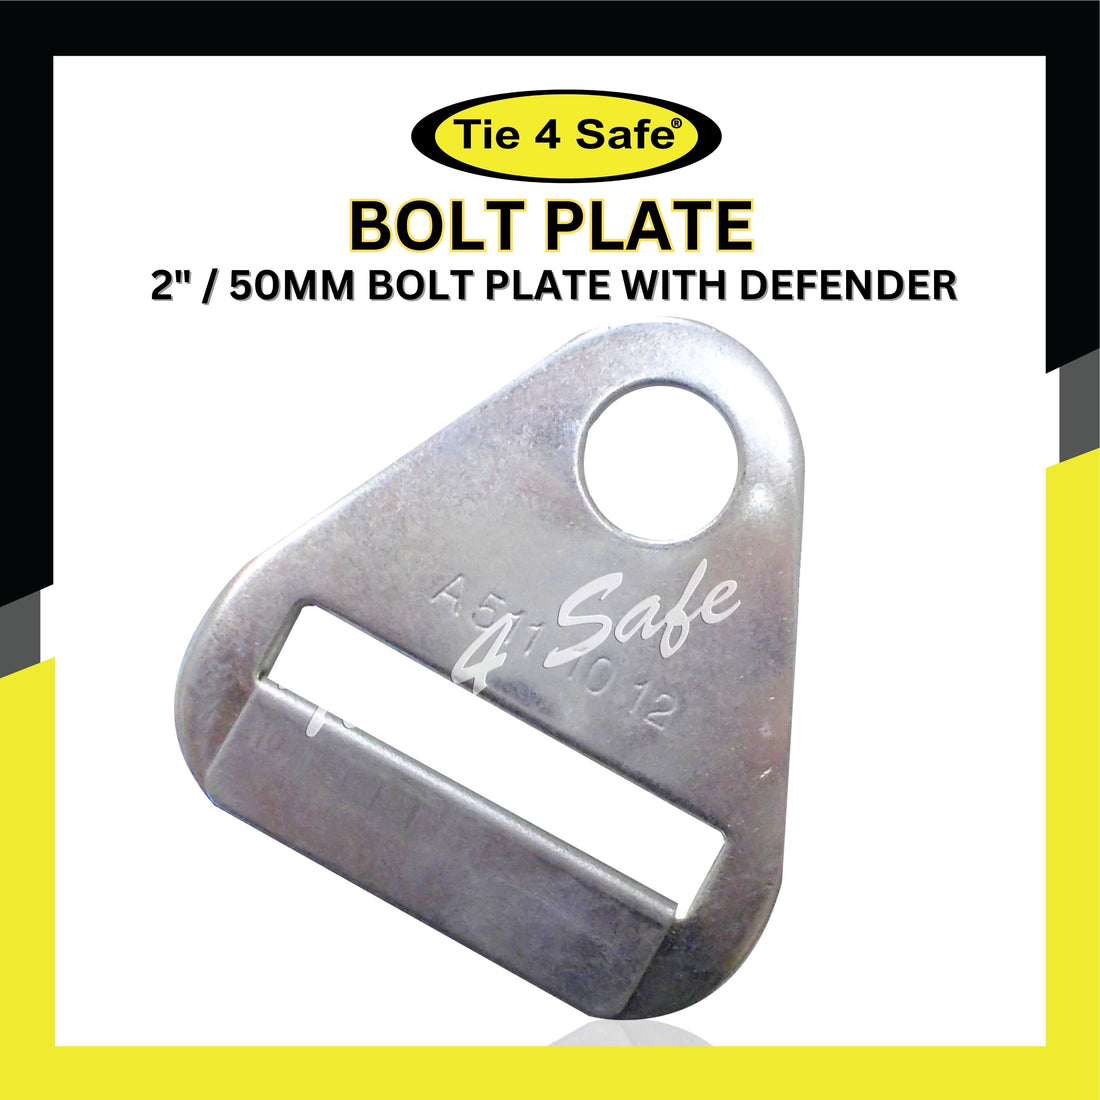 2"/ 50mm Bolt Plate With Defender